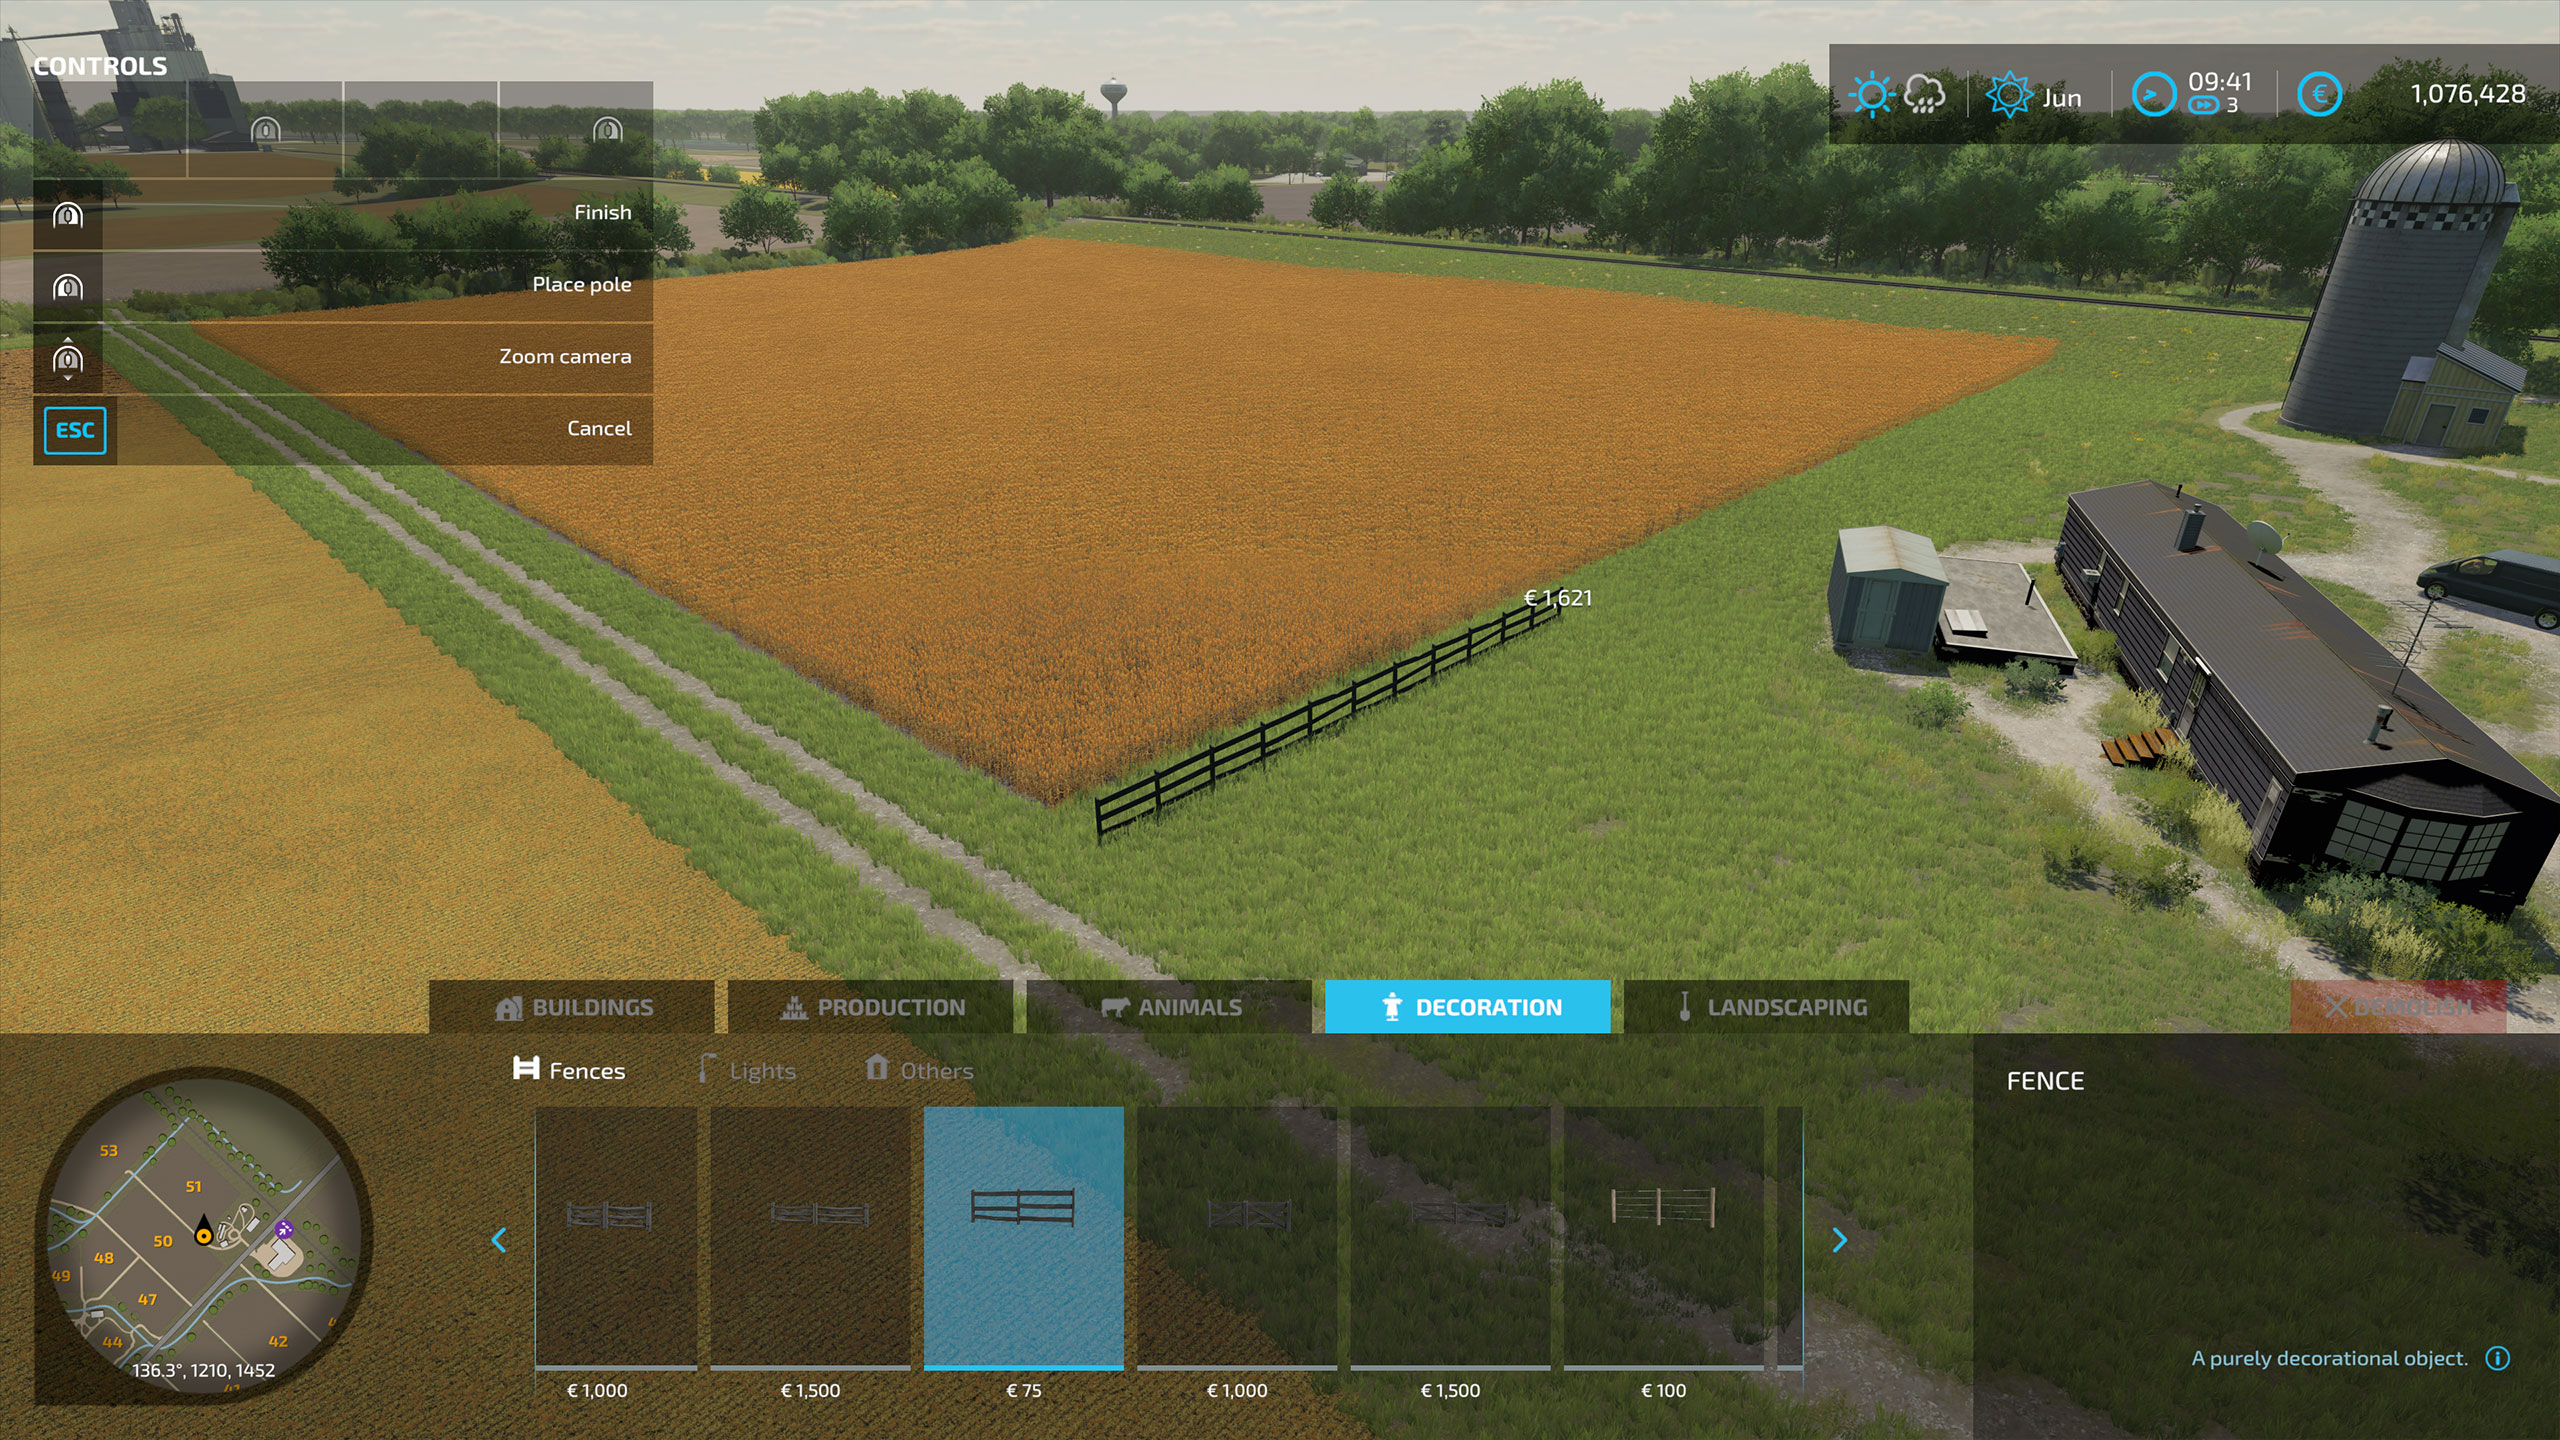 Farming Simulator 22 will be amazing if it includes these features